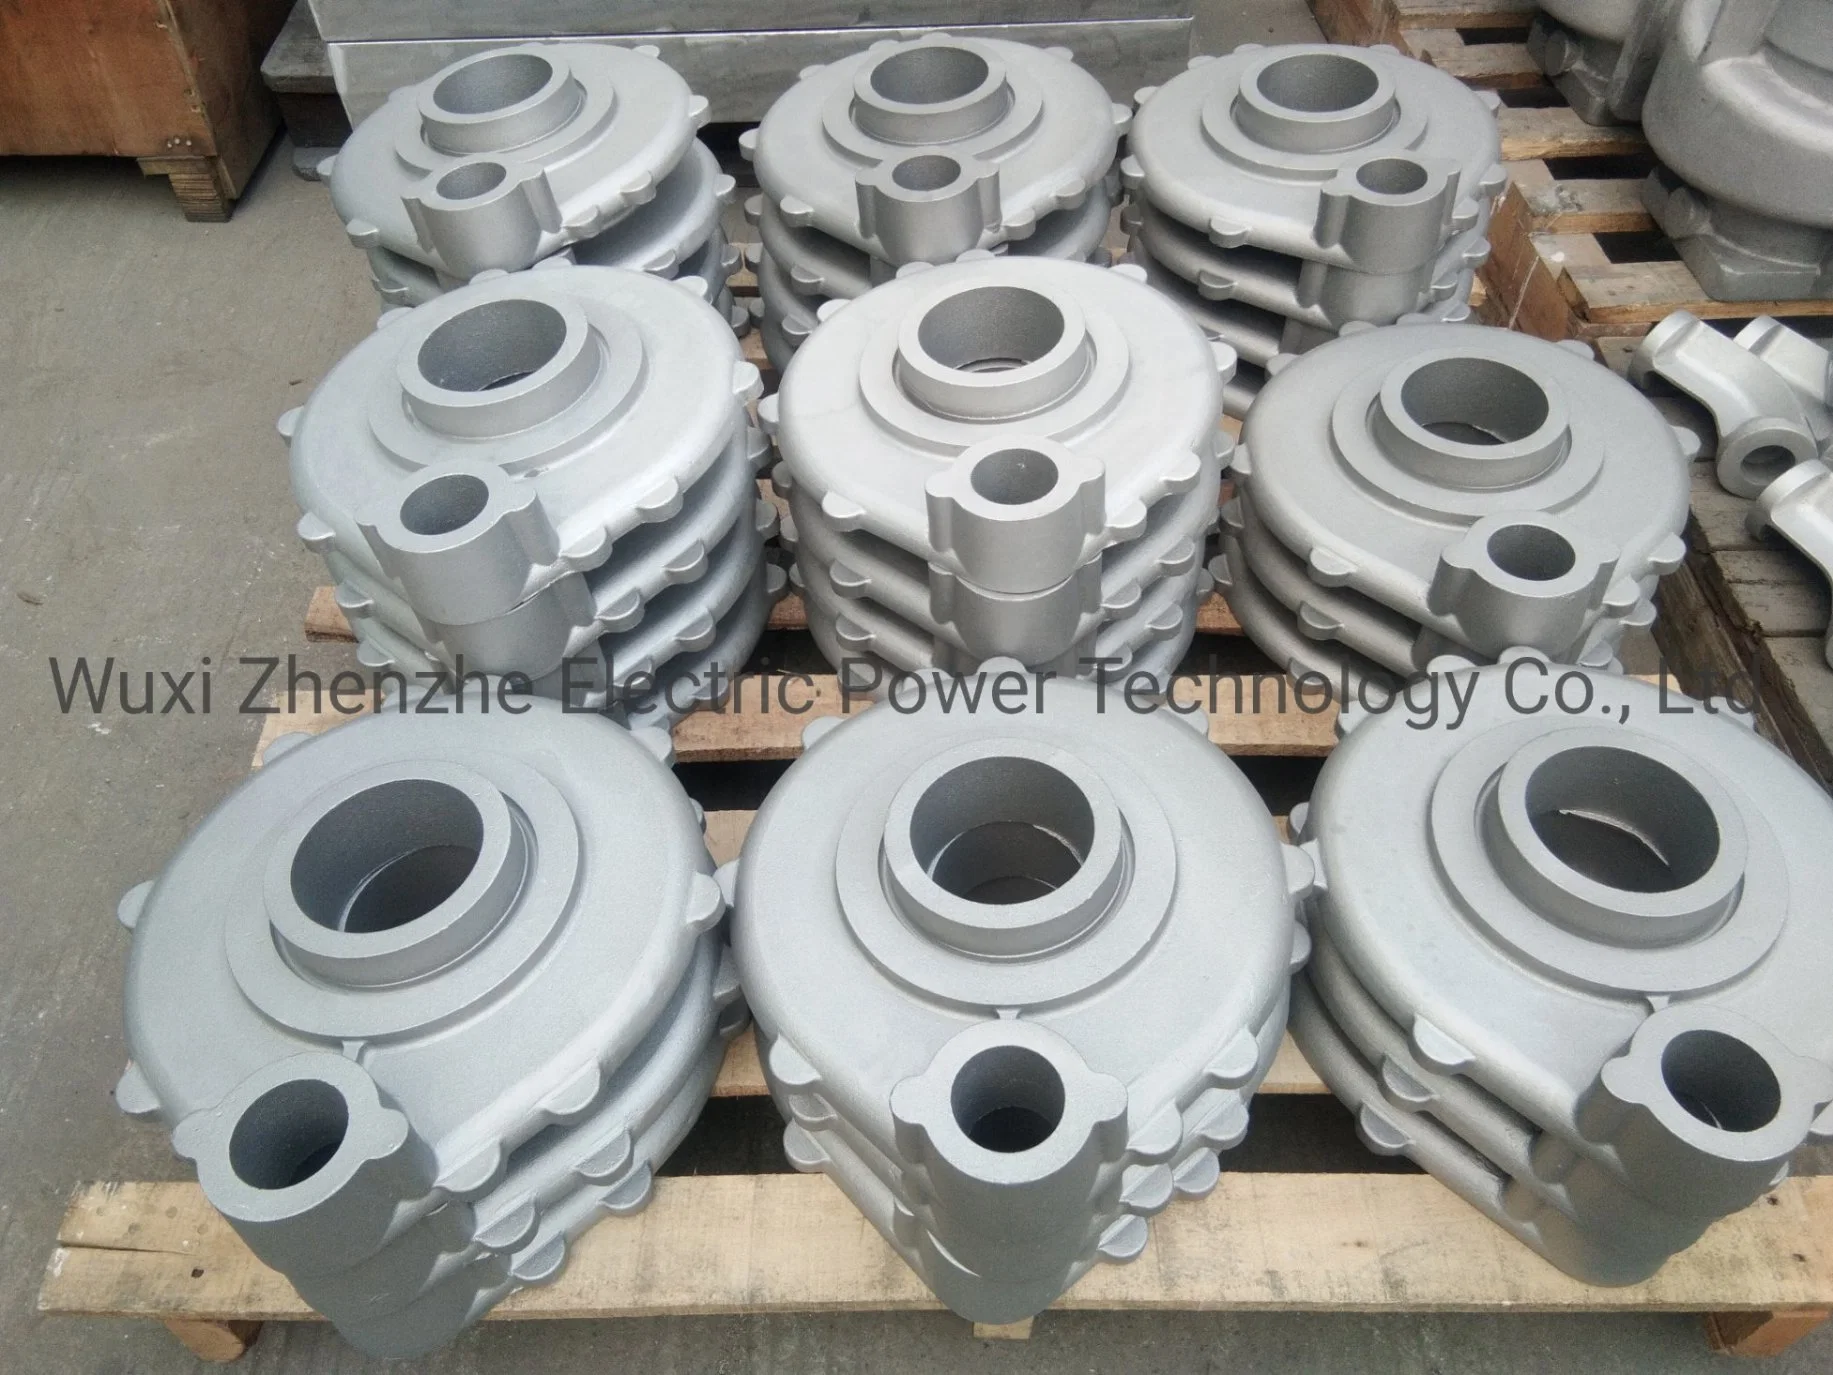 Aluminum Casting Machinery Equipment Cover/Gear Box Cover/Mechanical Parts Made by Sand Casting